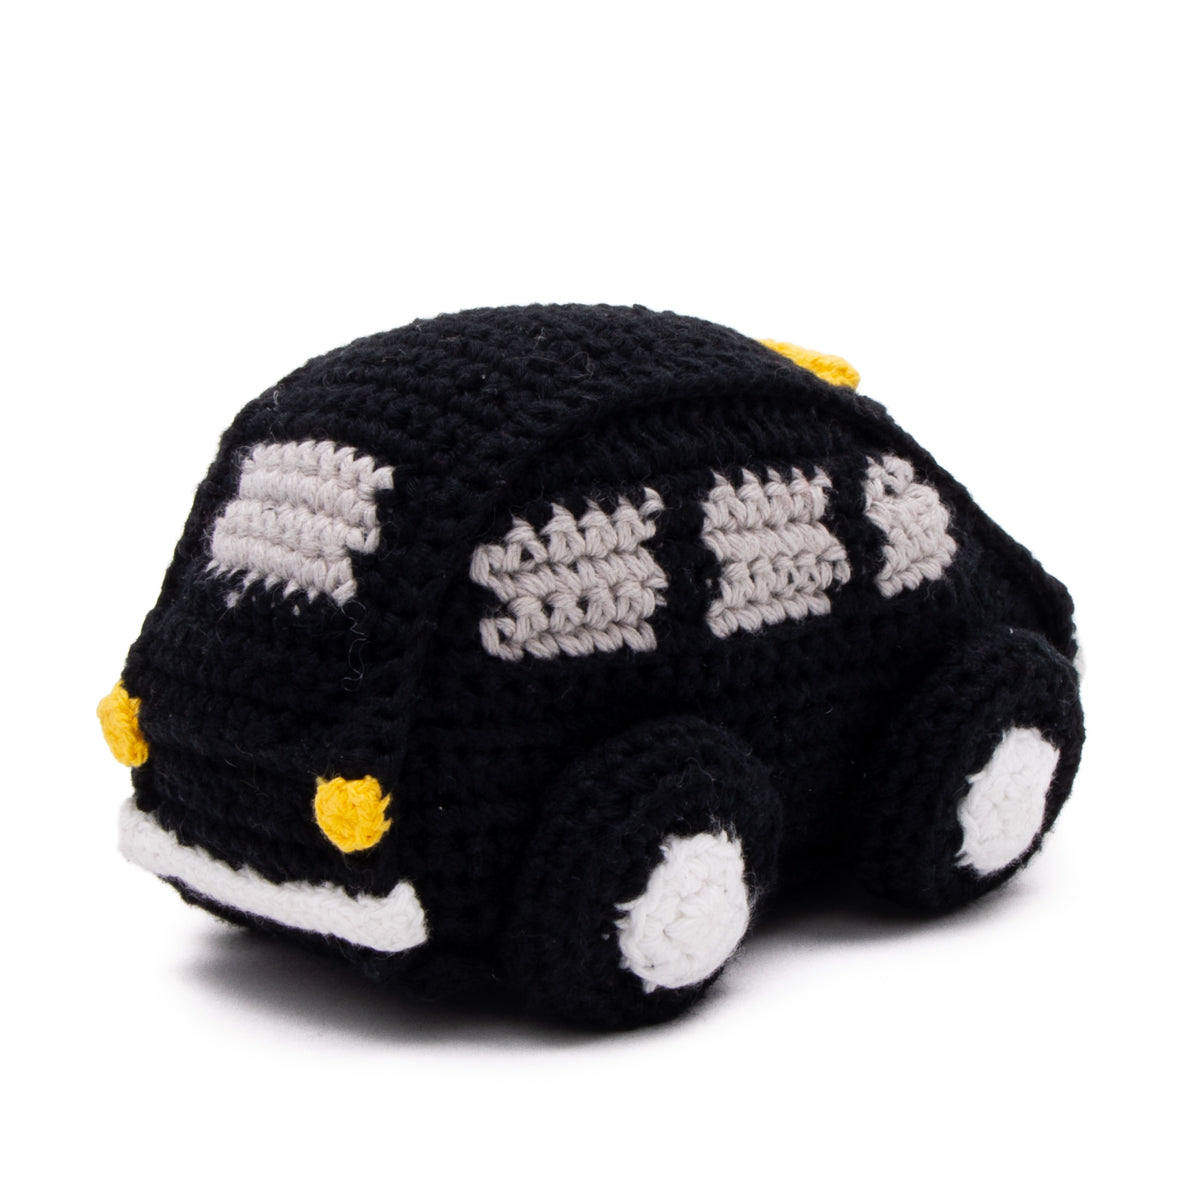 Black Cab Crochet Baby Toy With Rattle 3